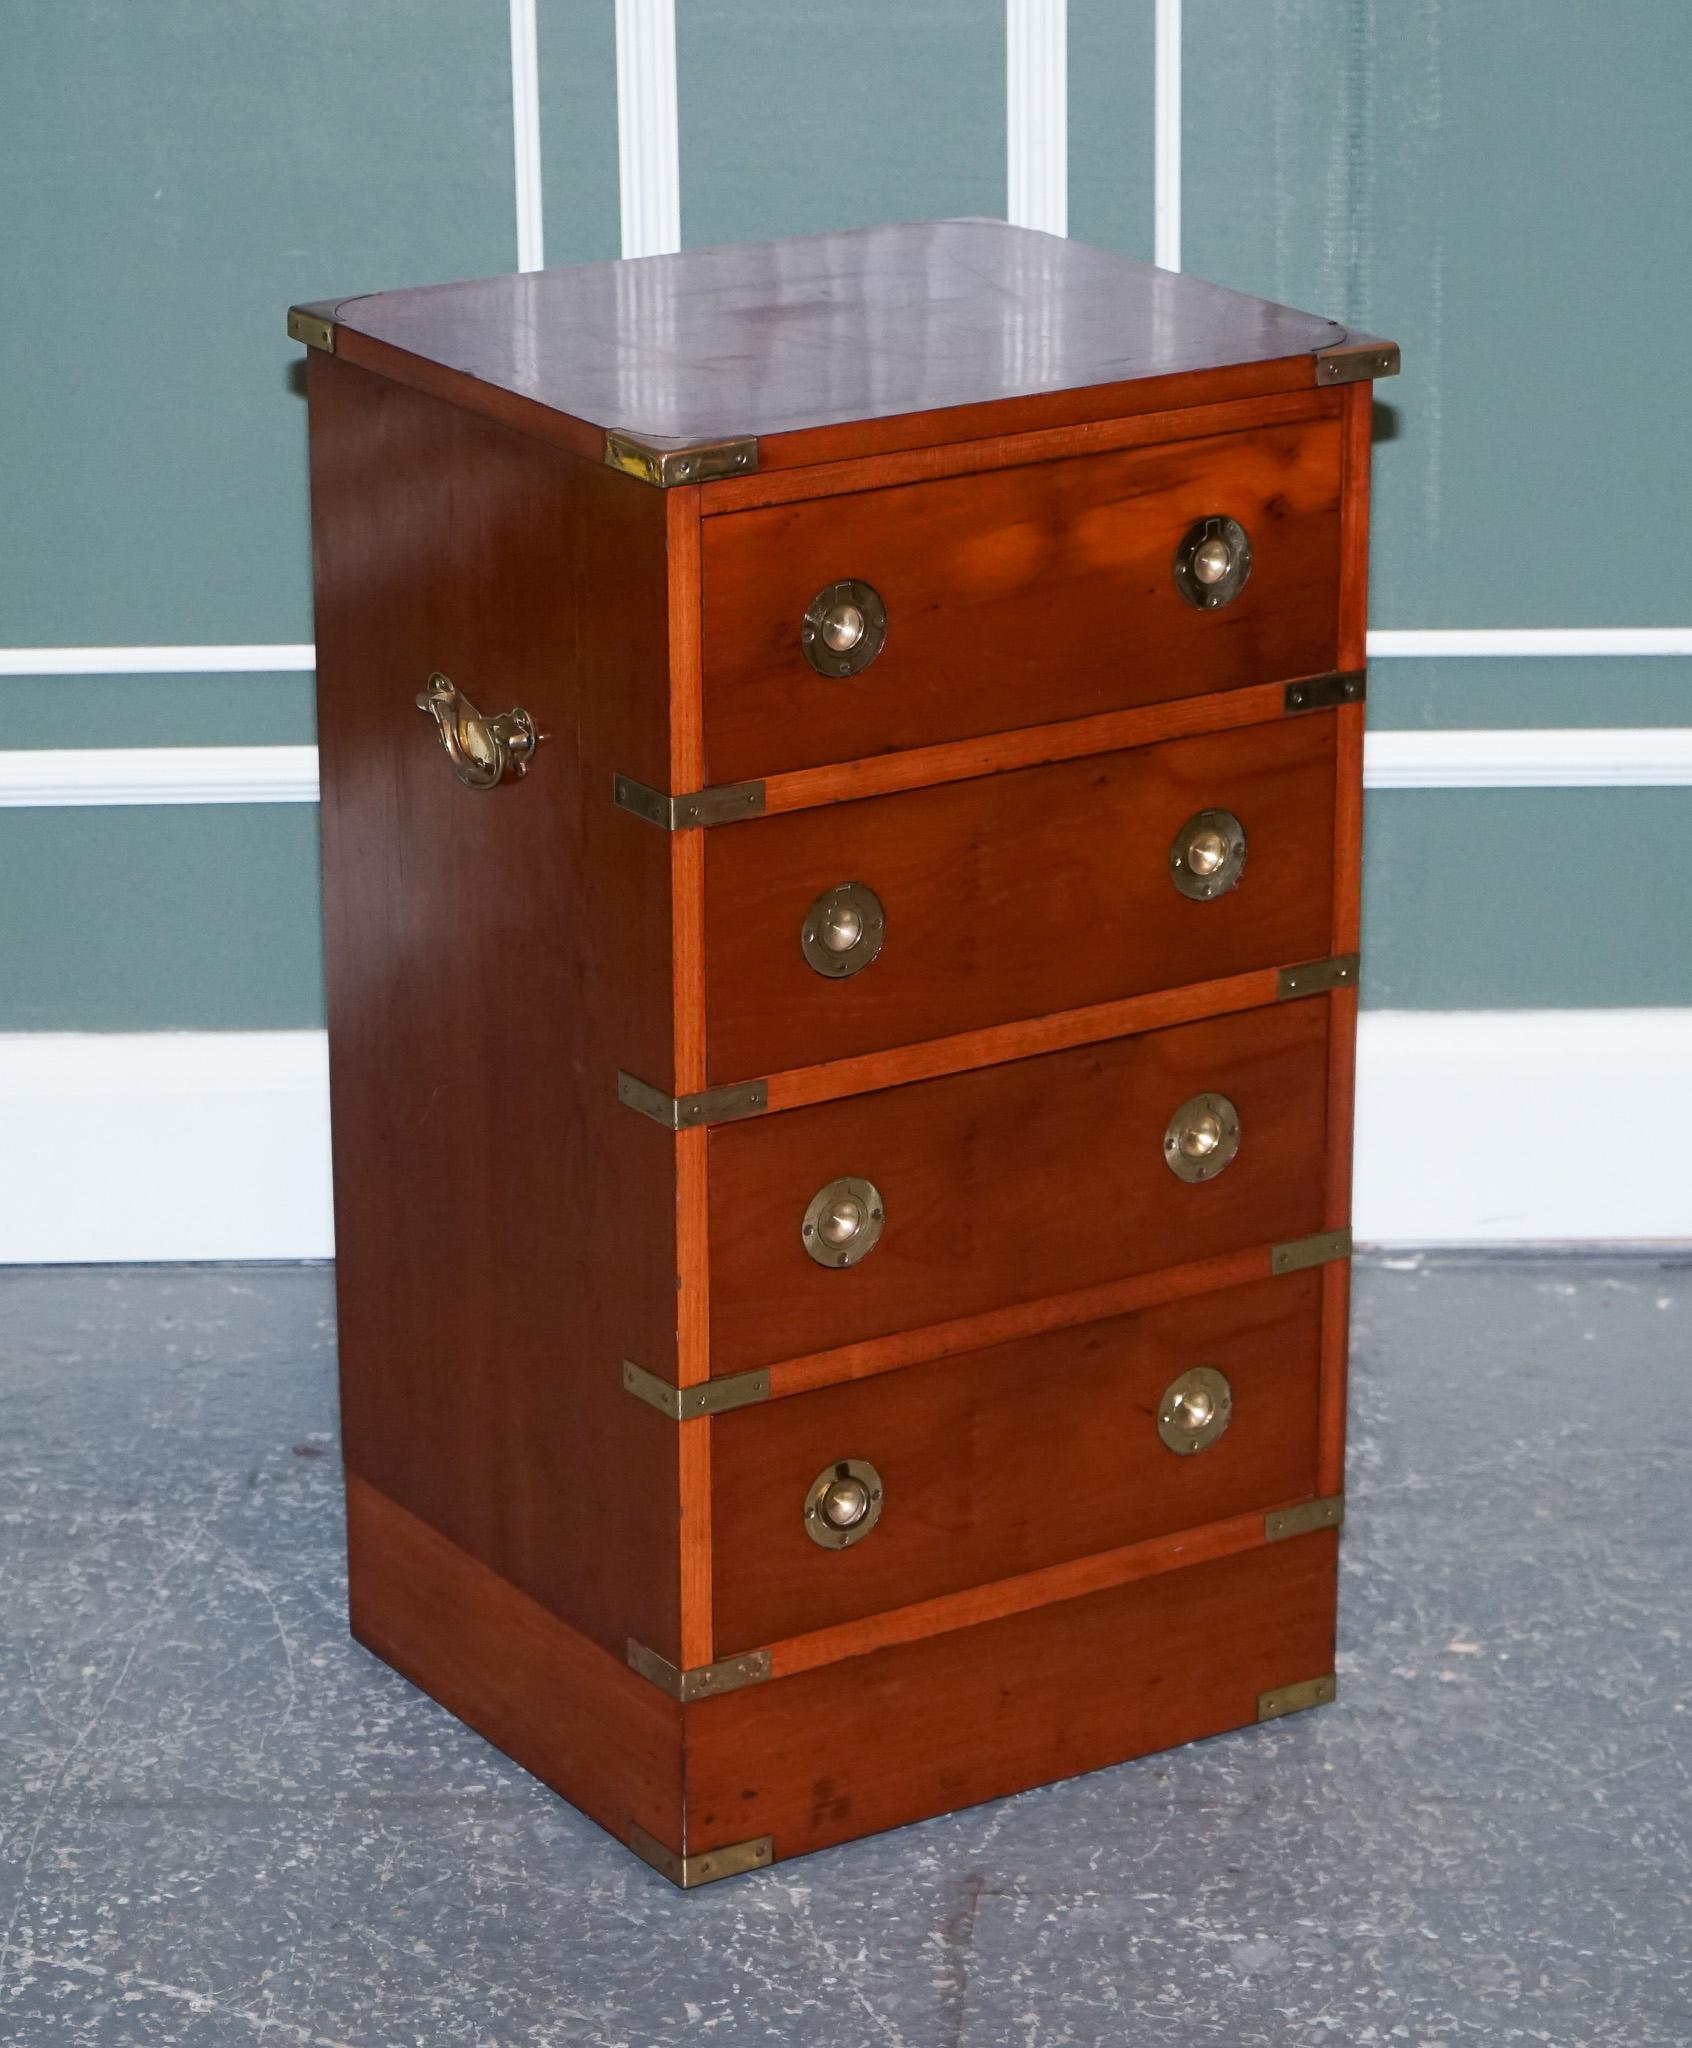 Vintage Yew Wood Military Campaign Chest of Drawers with 4 Drawers Brass Fitting 1